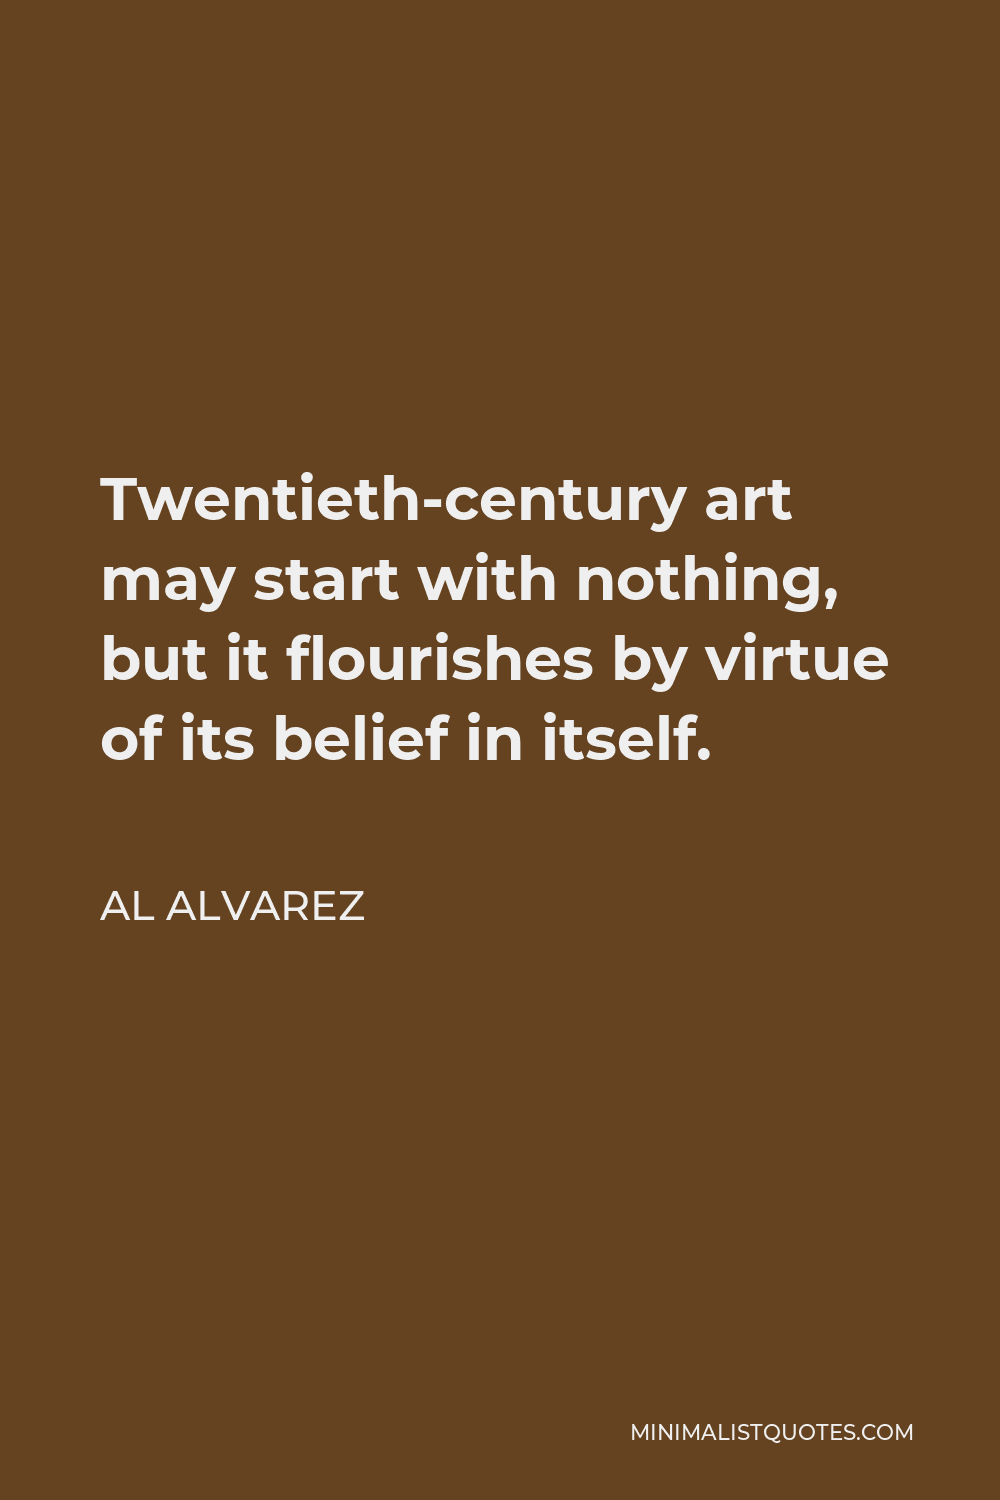 Al Alvarez Quote - Twentieth-century art may start with nothing, but it flourishes by virtue of its belief in itself.